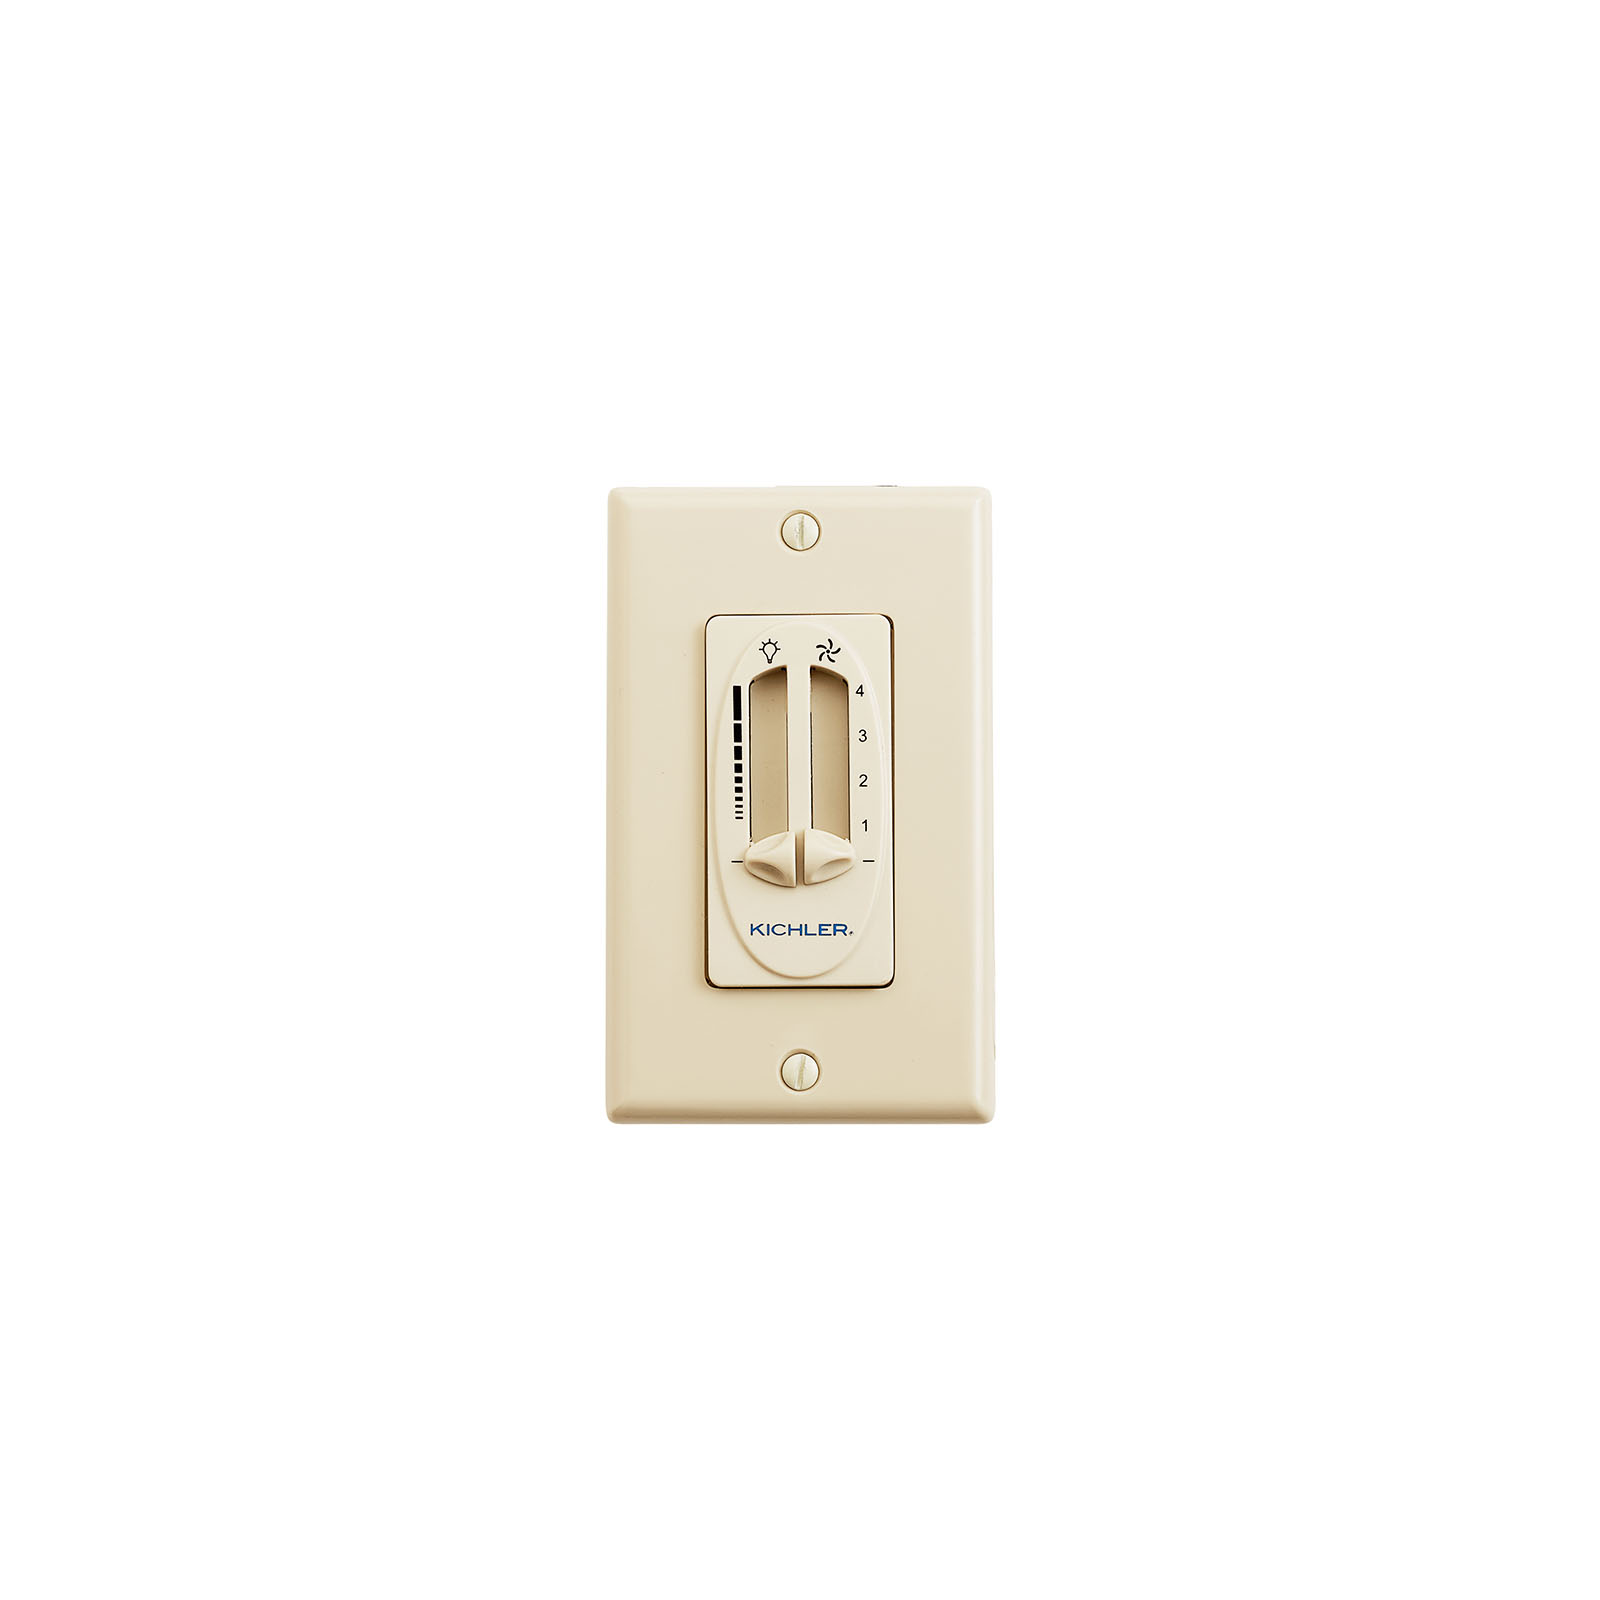 A lighting support necessity, this fan 4 speed light dimmer features a classic Ivory finish.